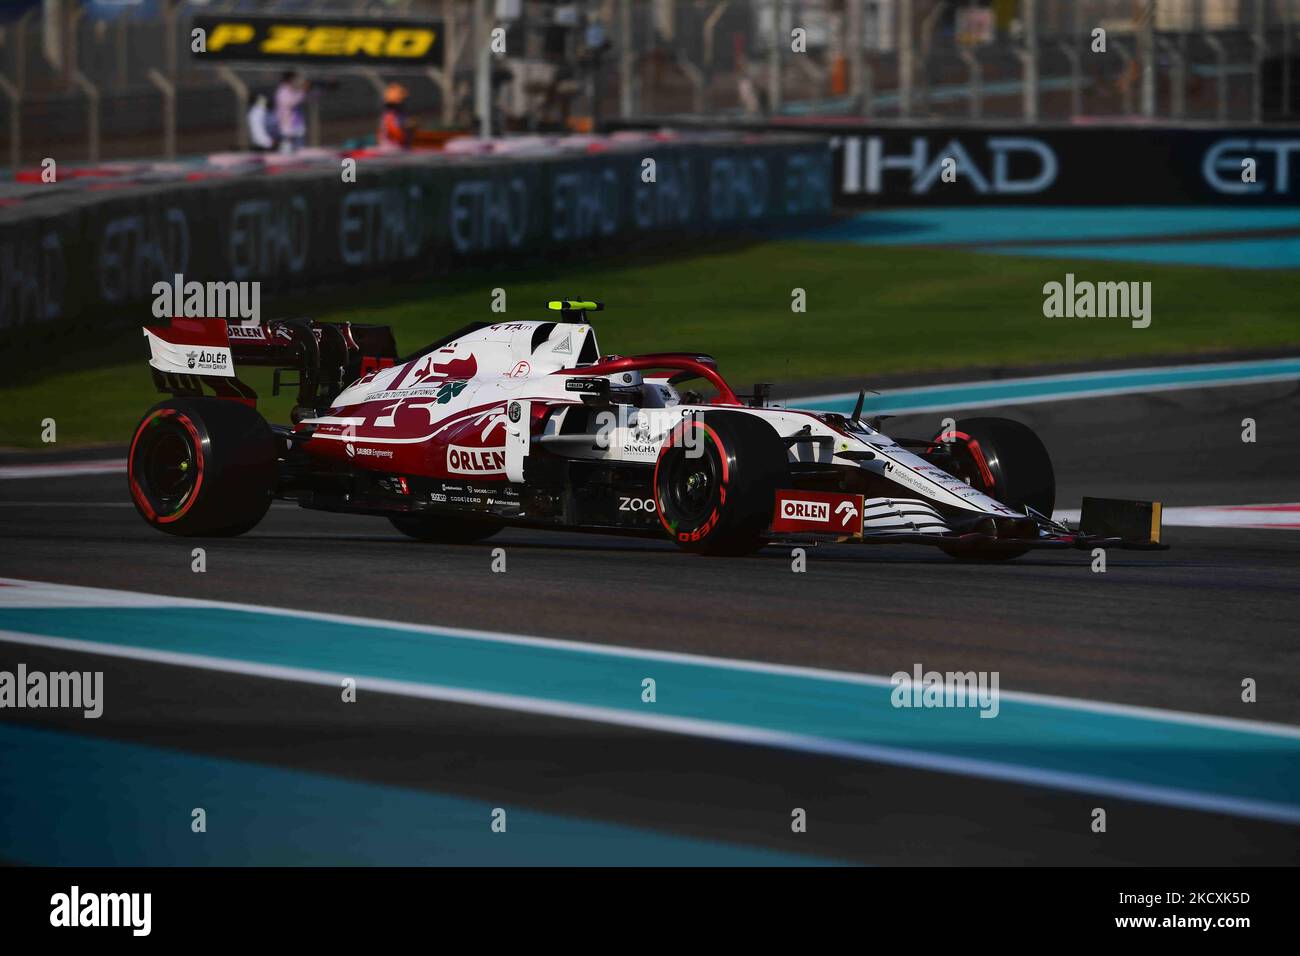 Antonio Giovinazzi of Alfa Romeo Racing ORLEN drive his C41 single-seater during qualifying session of last race of the year in Yes Marina Circuit, Yes Island, Abu Dhabi, Uniter Arab Emirates, 11 December 2021 (Photo by Andrea Diodato/NurPhoto) Stock Photo